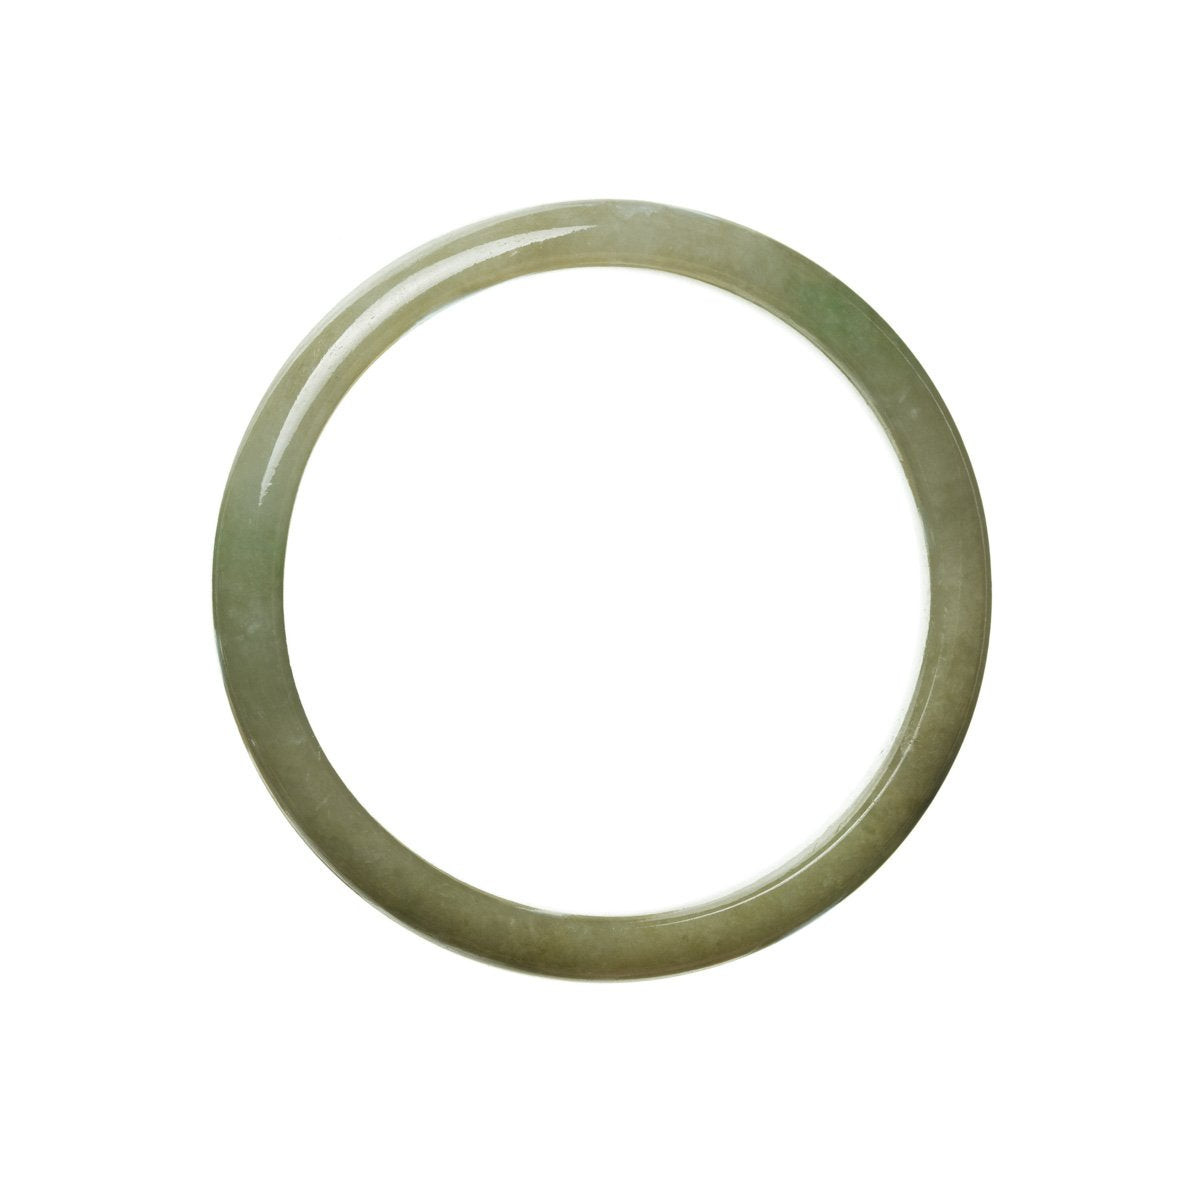 A close-up image of a half moon-shaped jade bracelet in brownish green color. The bracelet is made of authentic untreated traditional jade and has a diameter of 59mm. It is a beautiful and unique piece of jewelry.